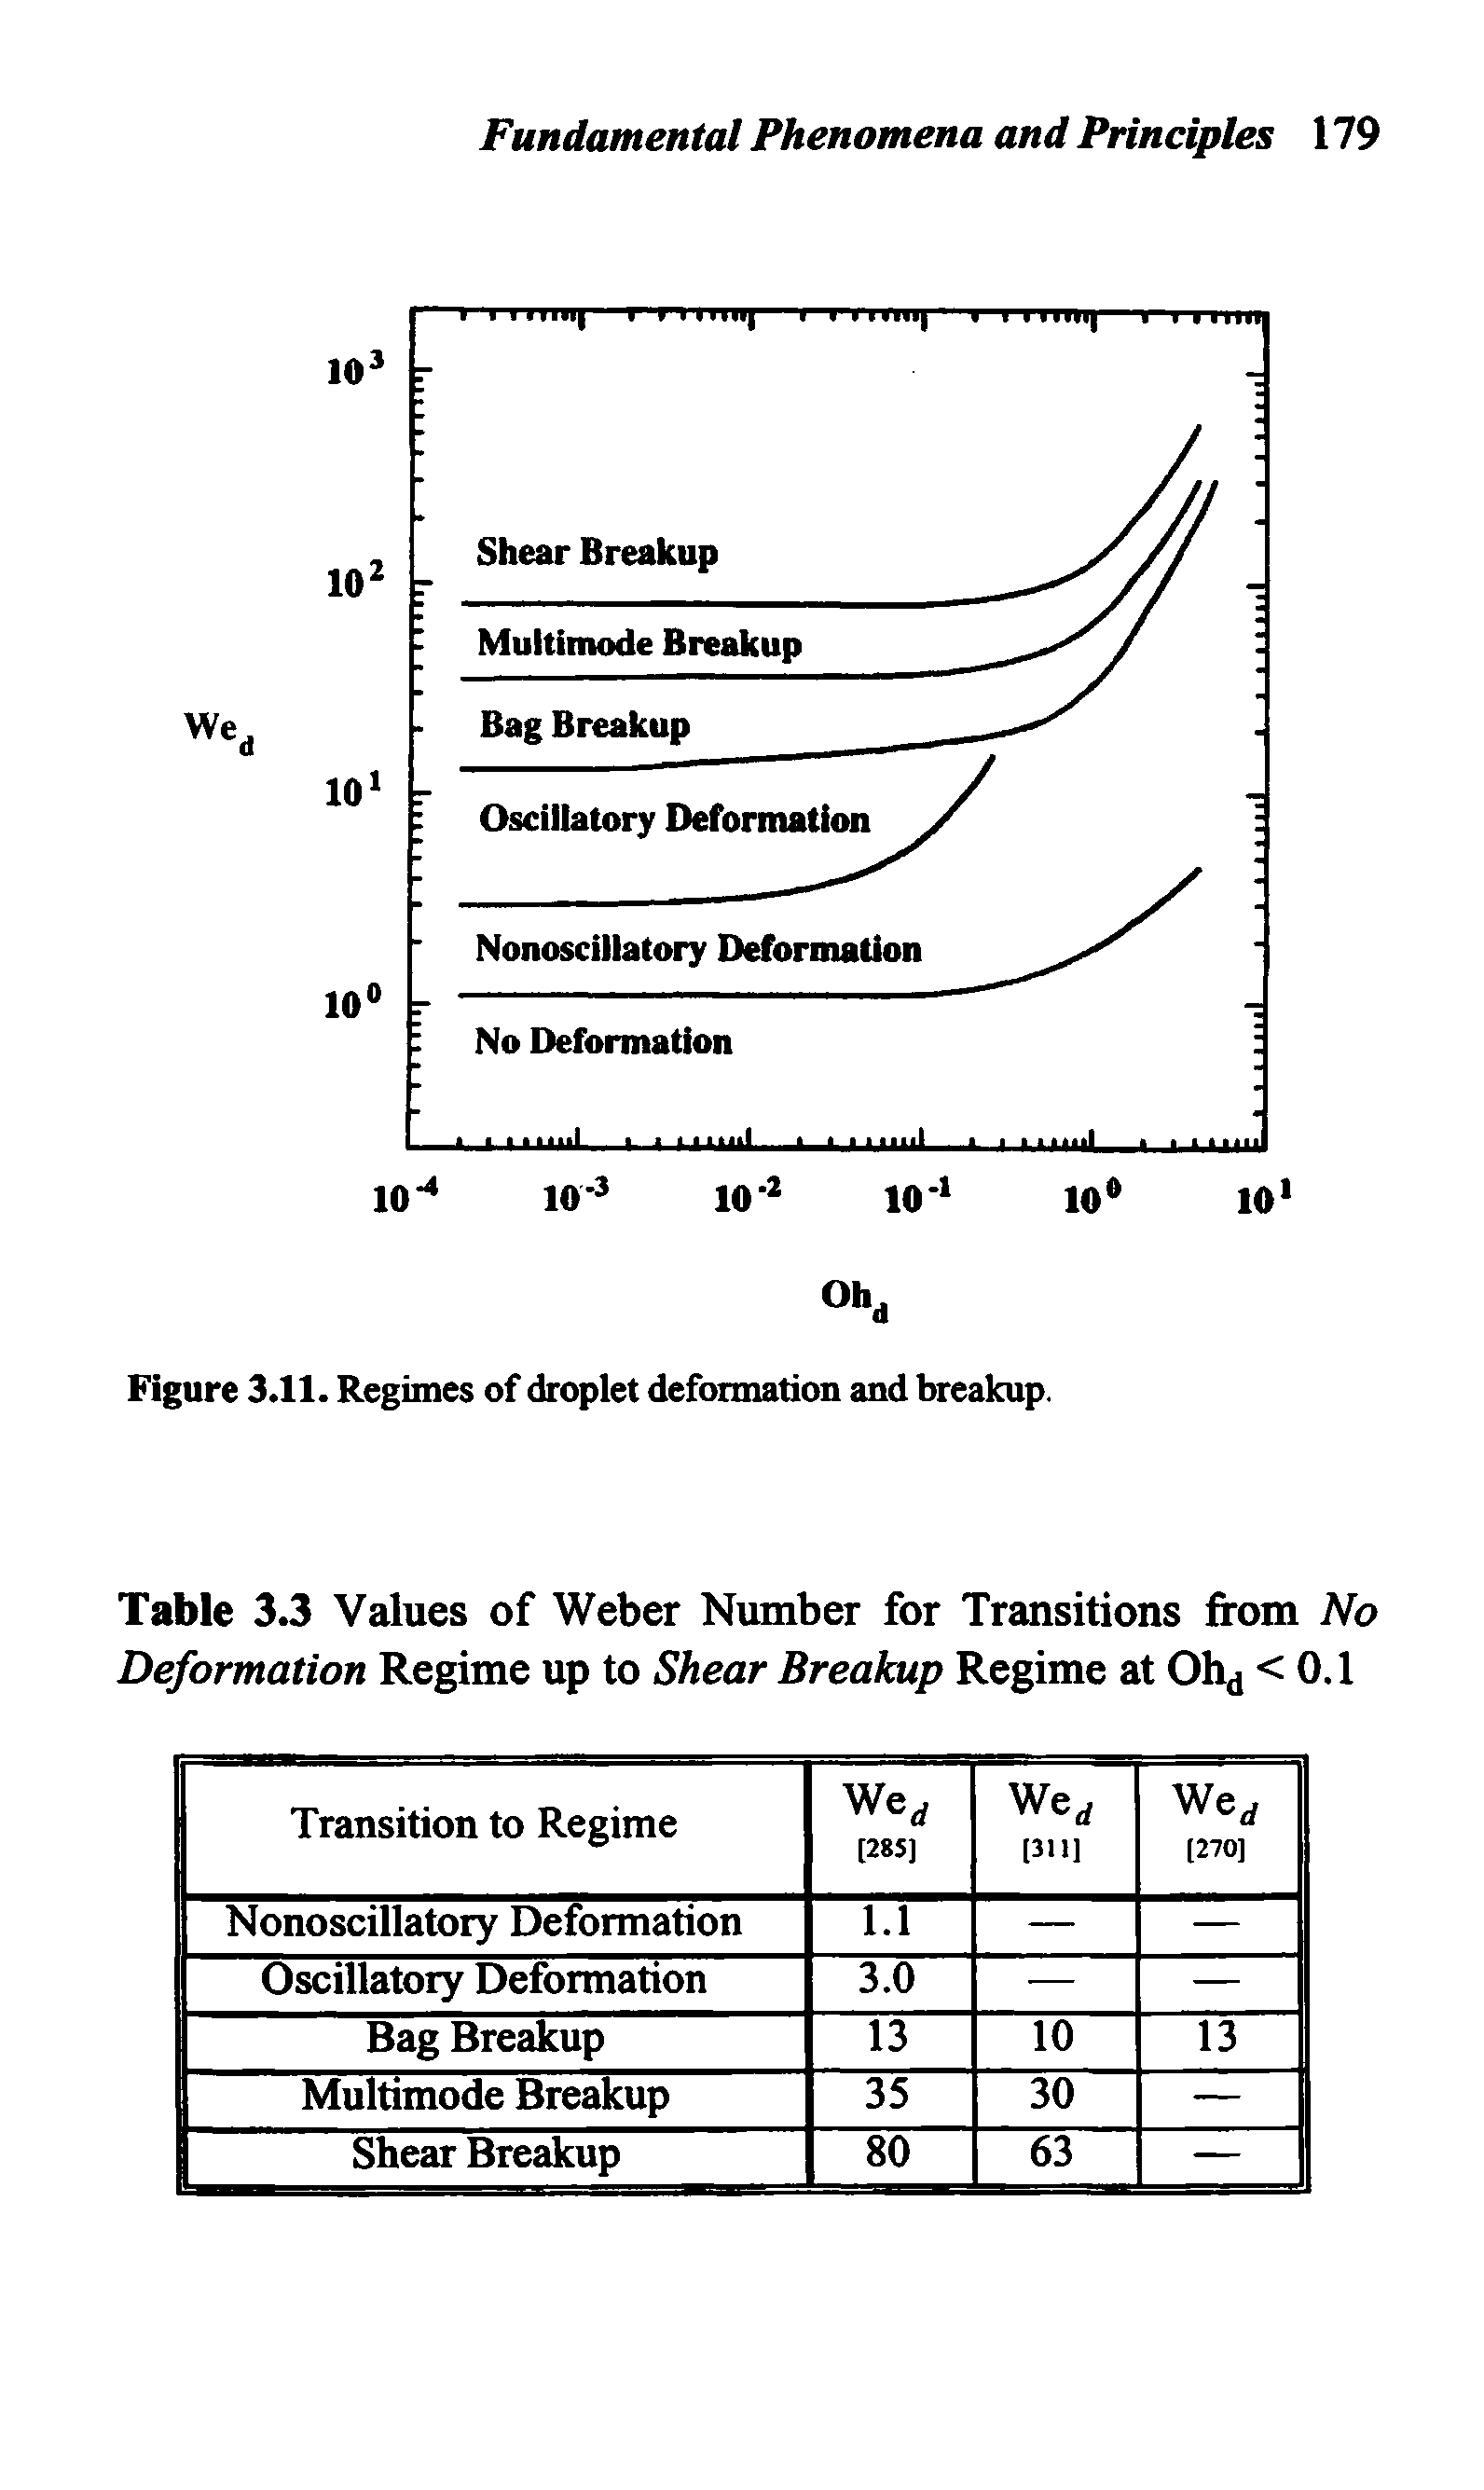 Table 3.3 Values of Weber Number for Transitions from No Deformation Regime up to Shear Breakup Regime at 0hd <0.1...